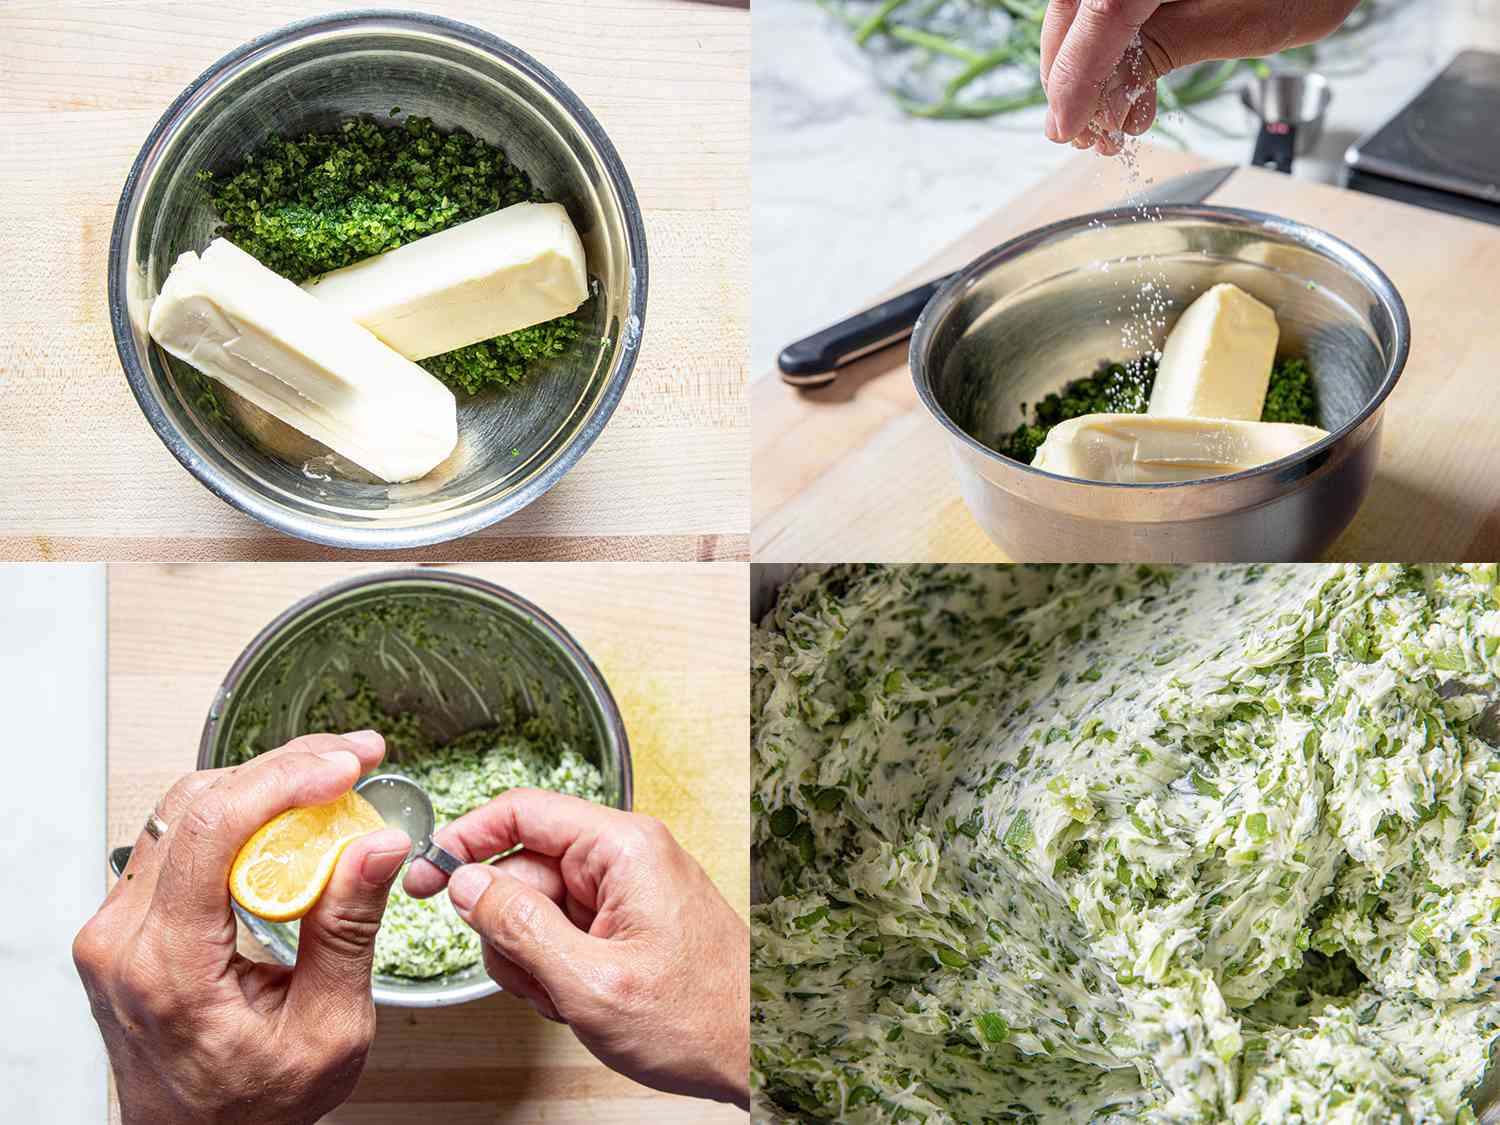 Four Image Collage. Top Left: Unmixed butter and minced garlic scapes in a metal bowl. Top Right: A hand seasoning the mixture with salt. Bottom left: Overhead view of a lemon being squeezed into mixture. Bottom right: a close up of compound butter